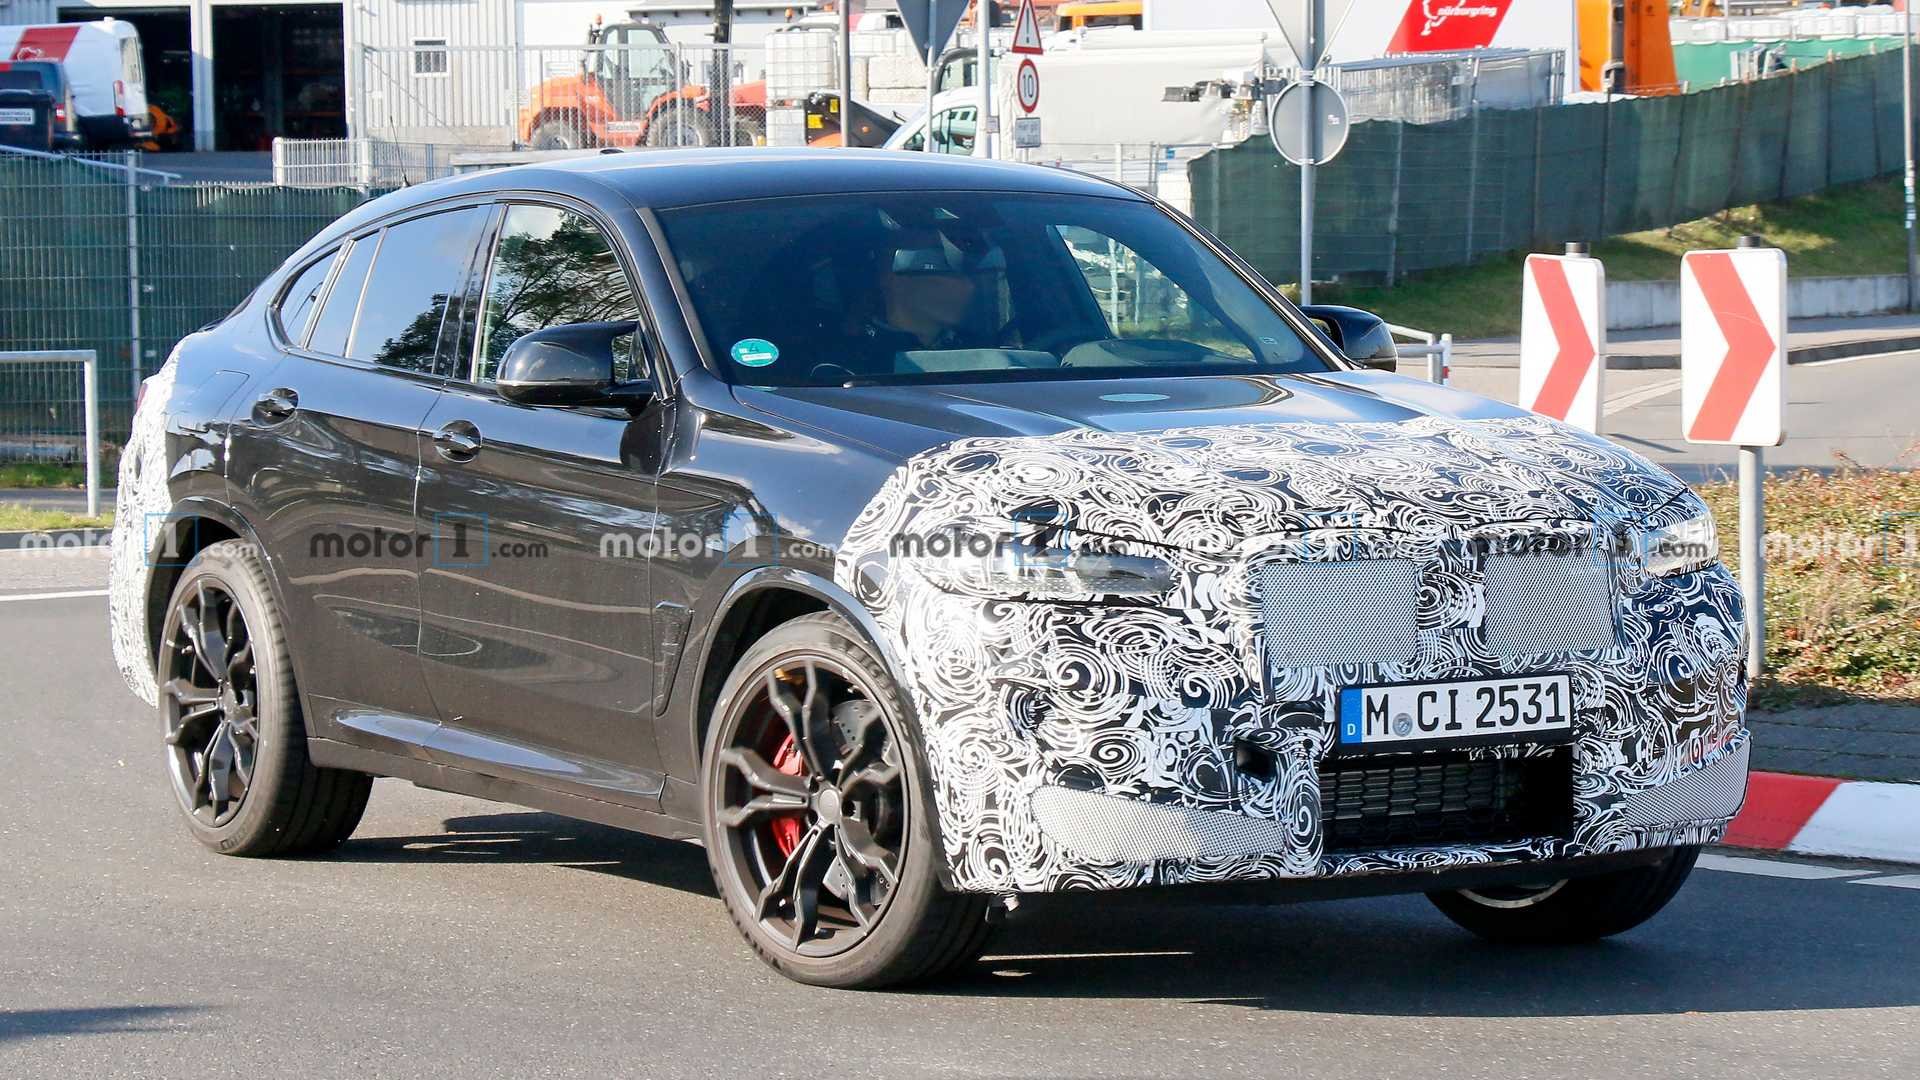 Refreshed BMW X4 M Spied Showing Thinner Headlights, Updated Nose